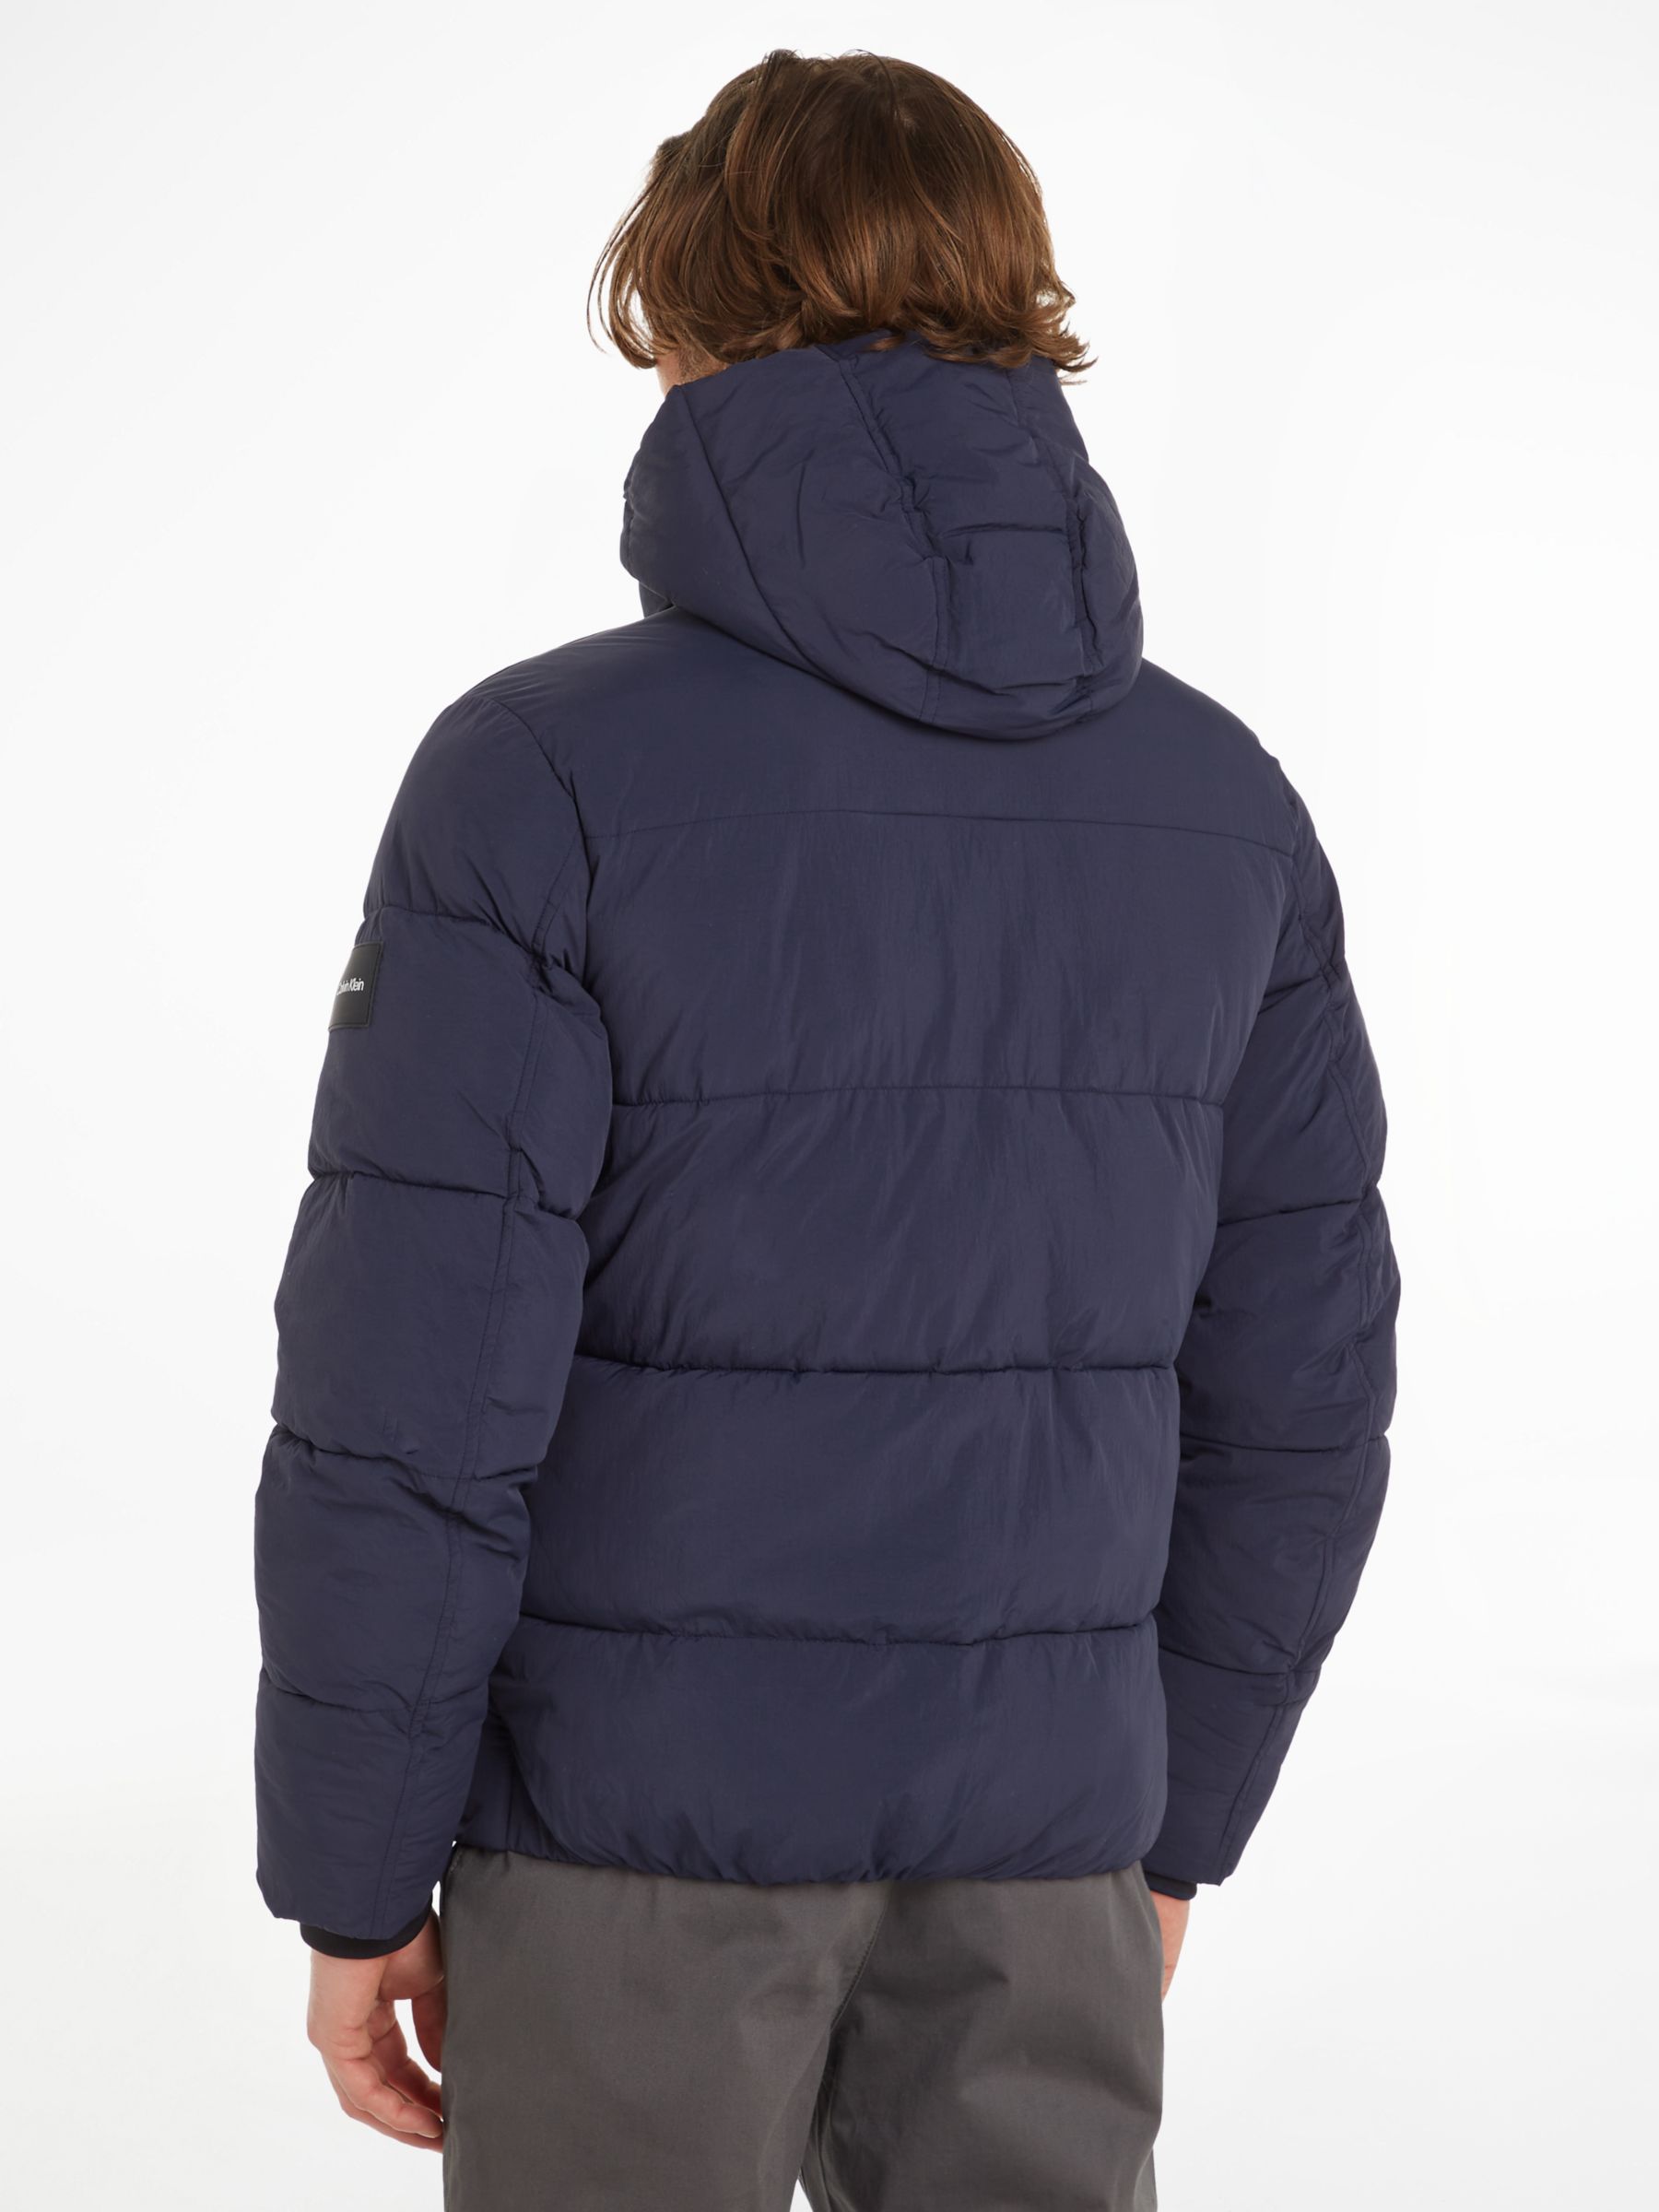 Calvin Klein Crinkled Recycled Puffer Jacket